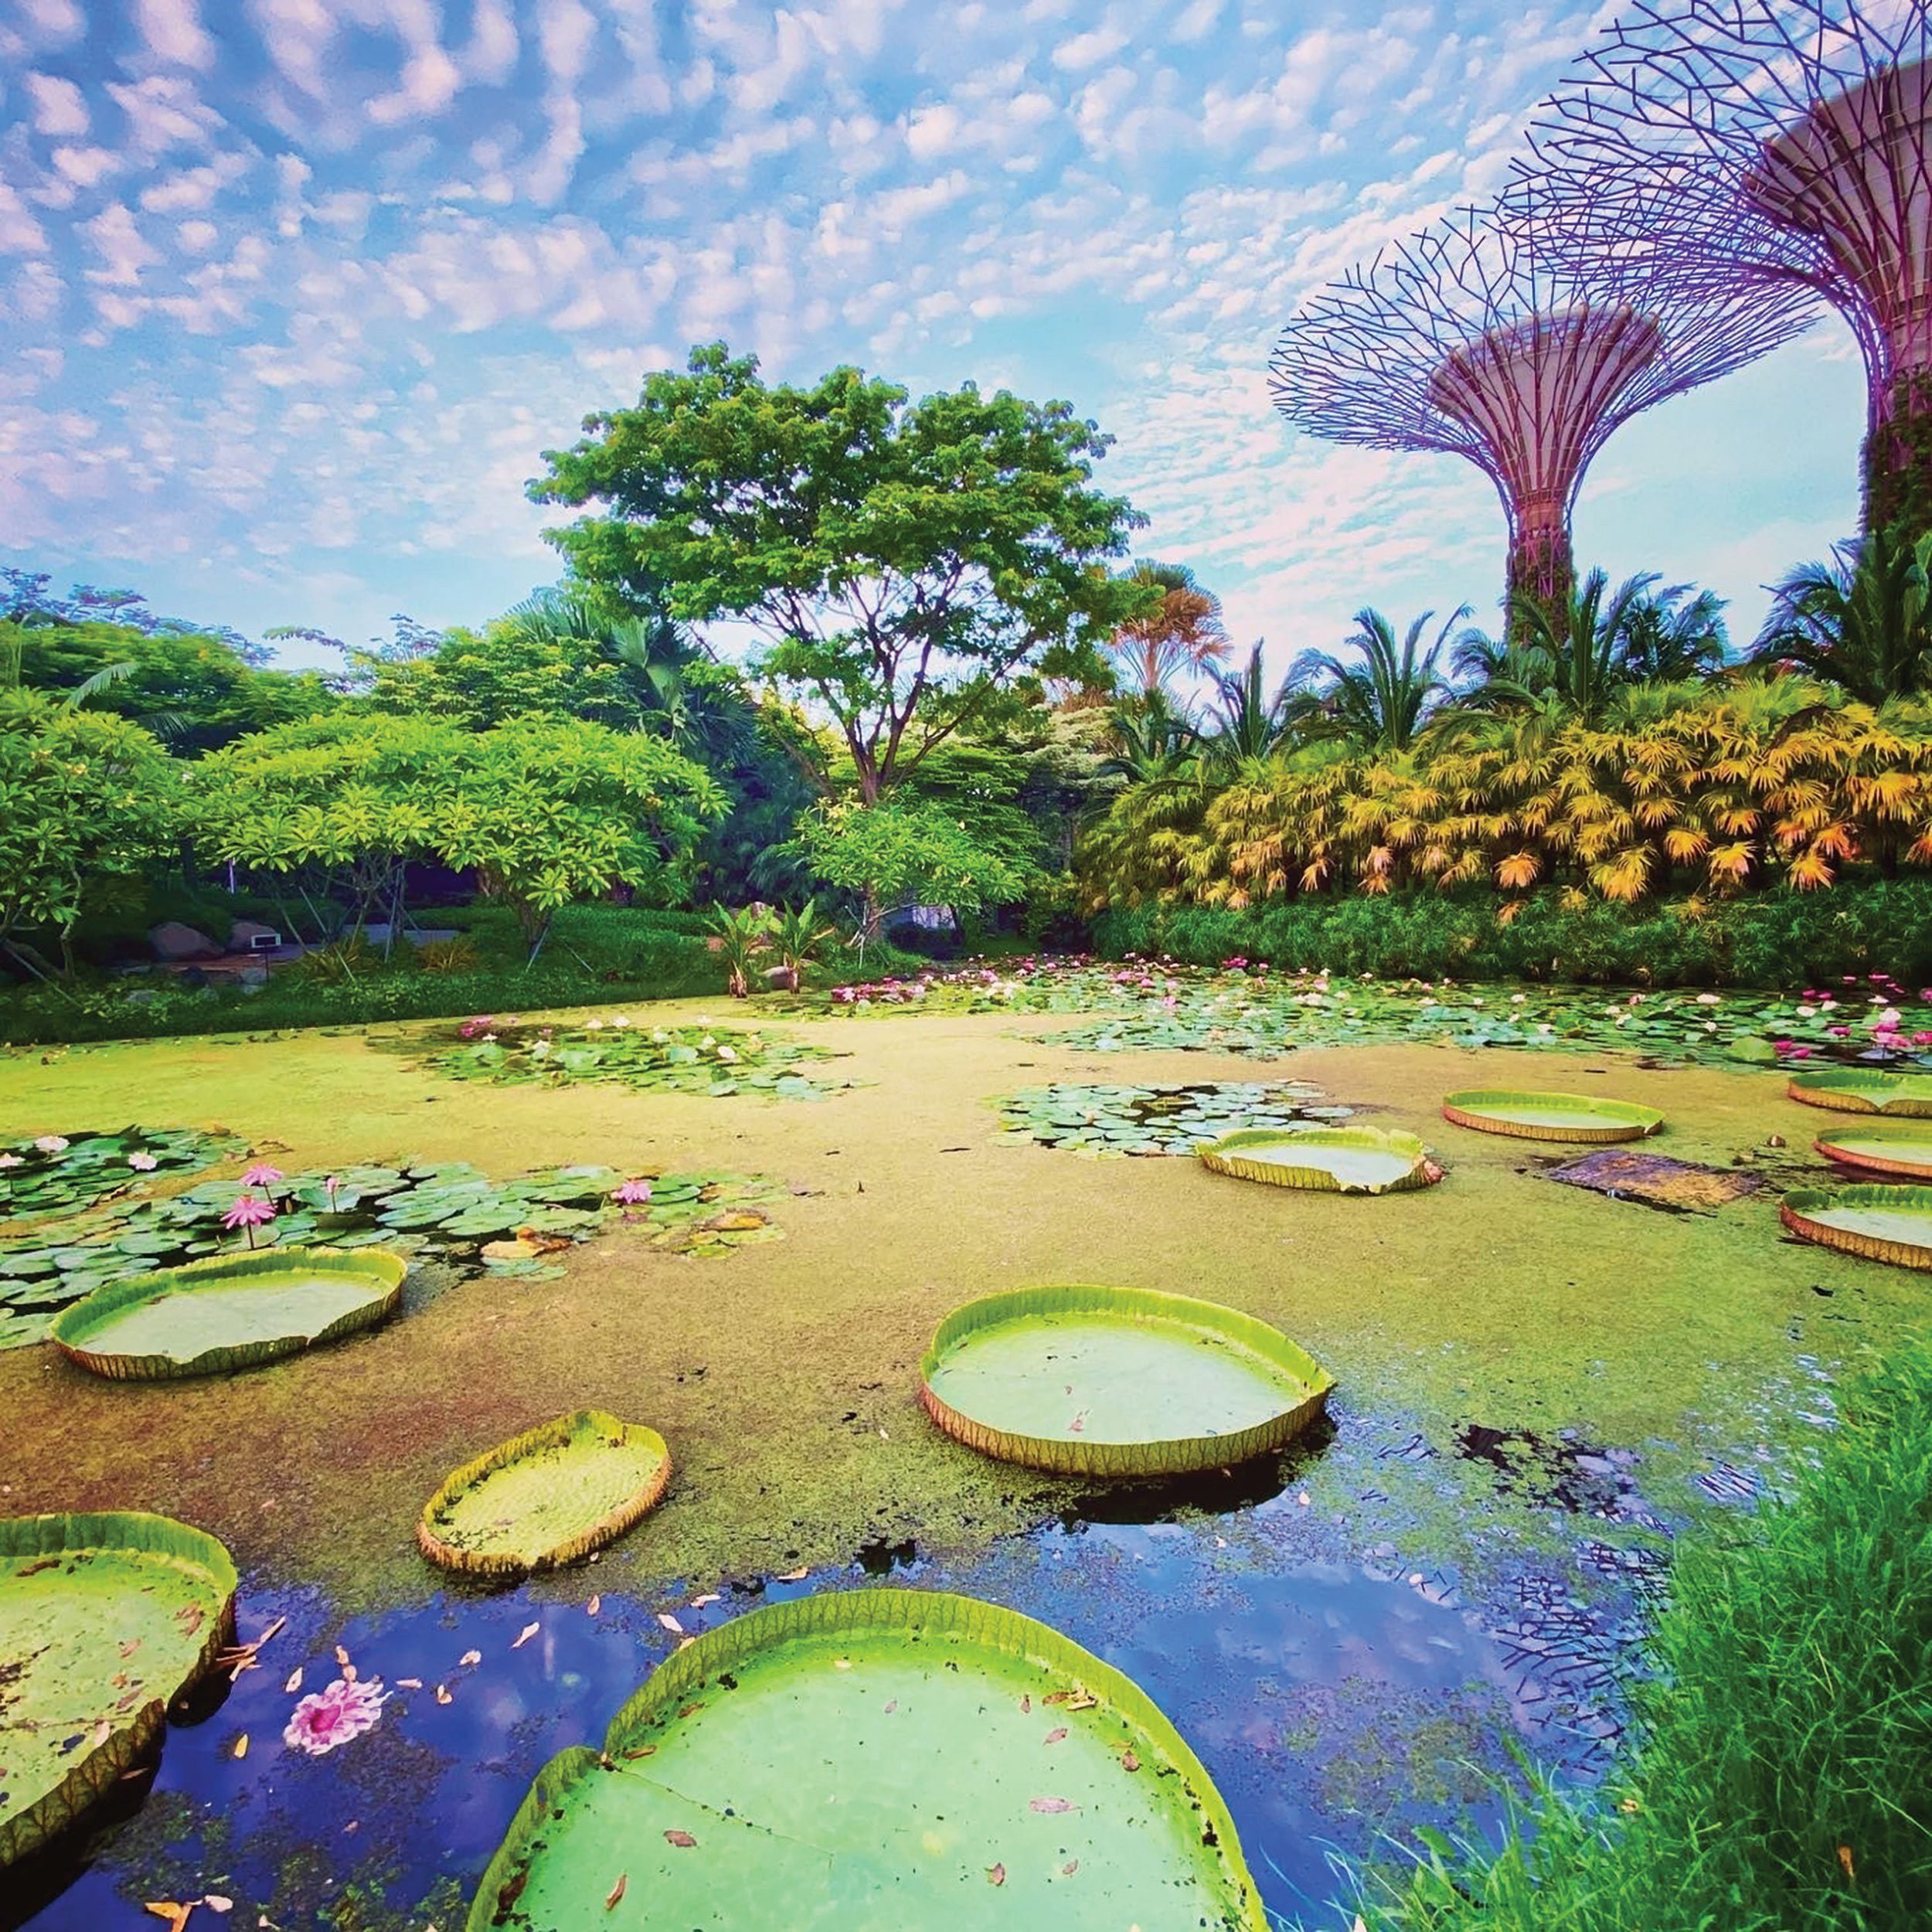 Lotus pond and Supertrees at Gardens by the Bay